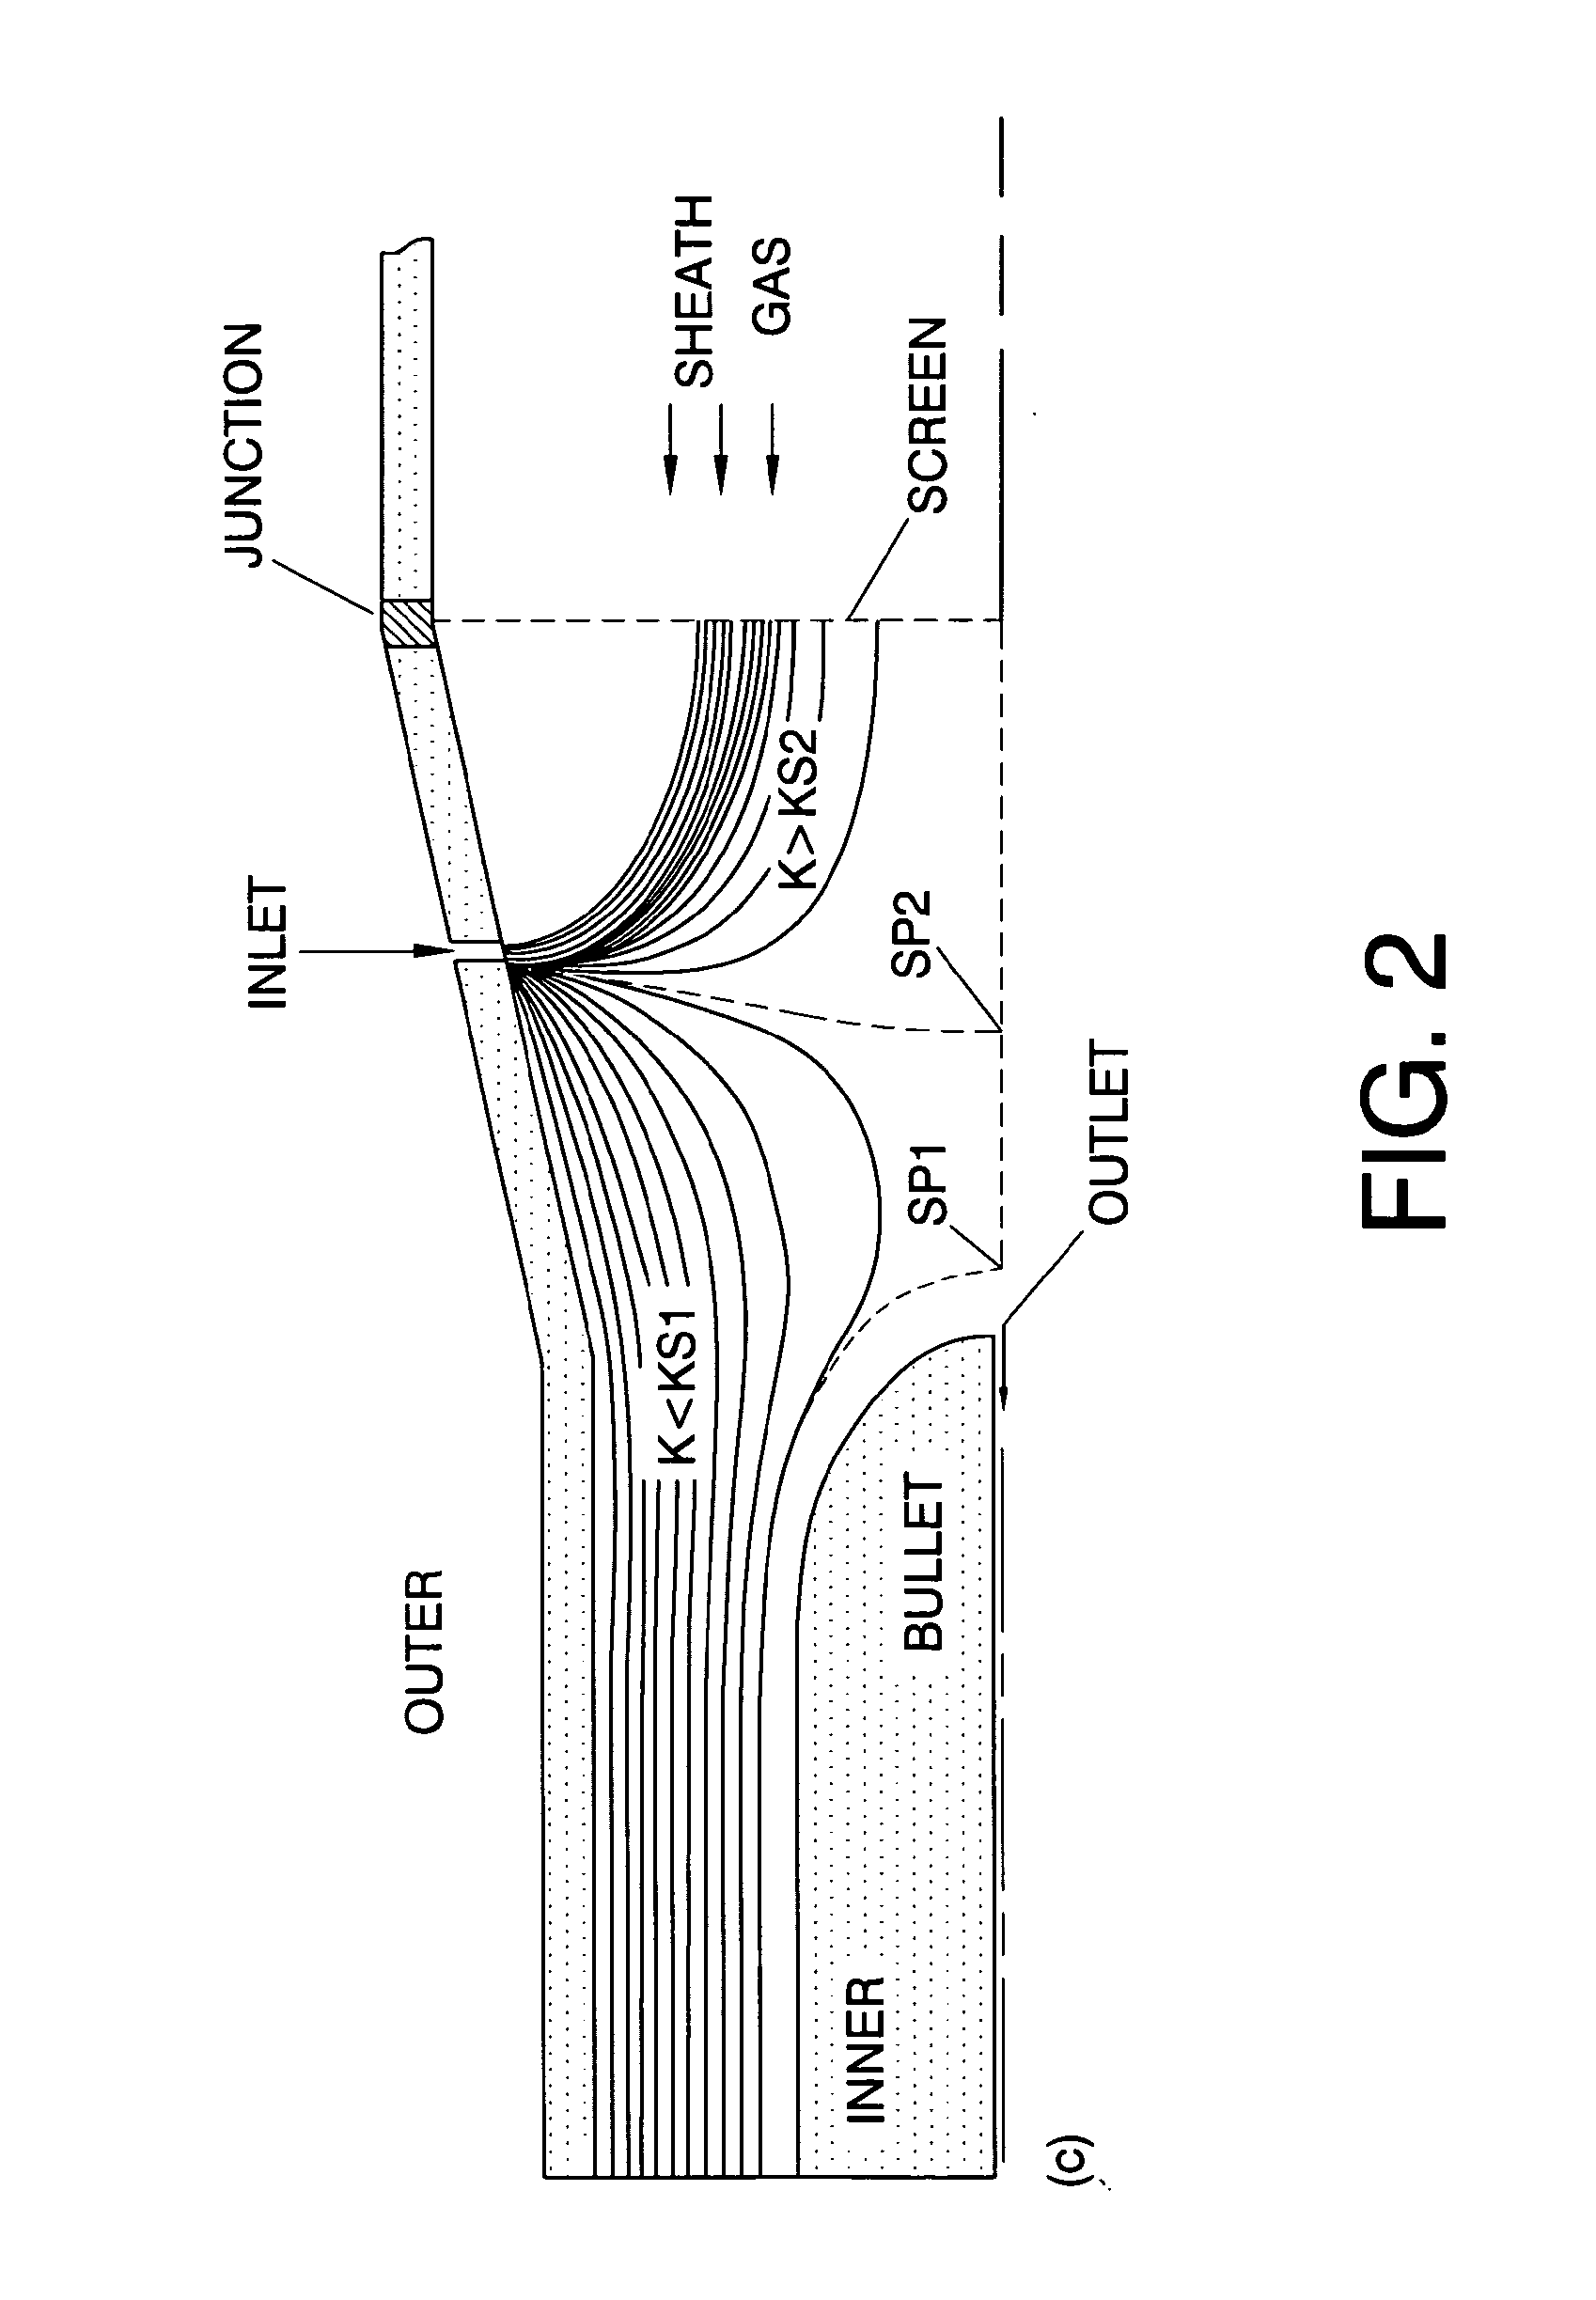 Coupling between axisymmetric differential mobility analyzers and mass spectrometers or other analyzers and detectors